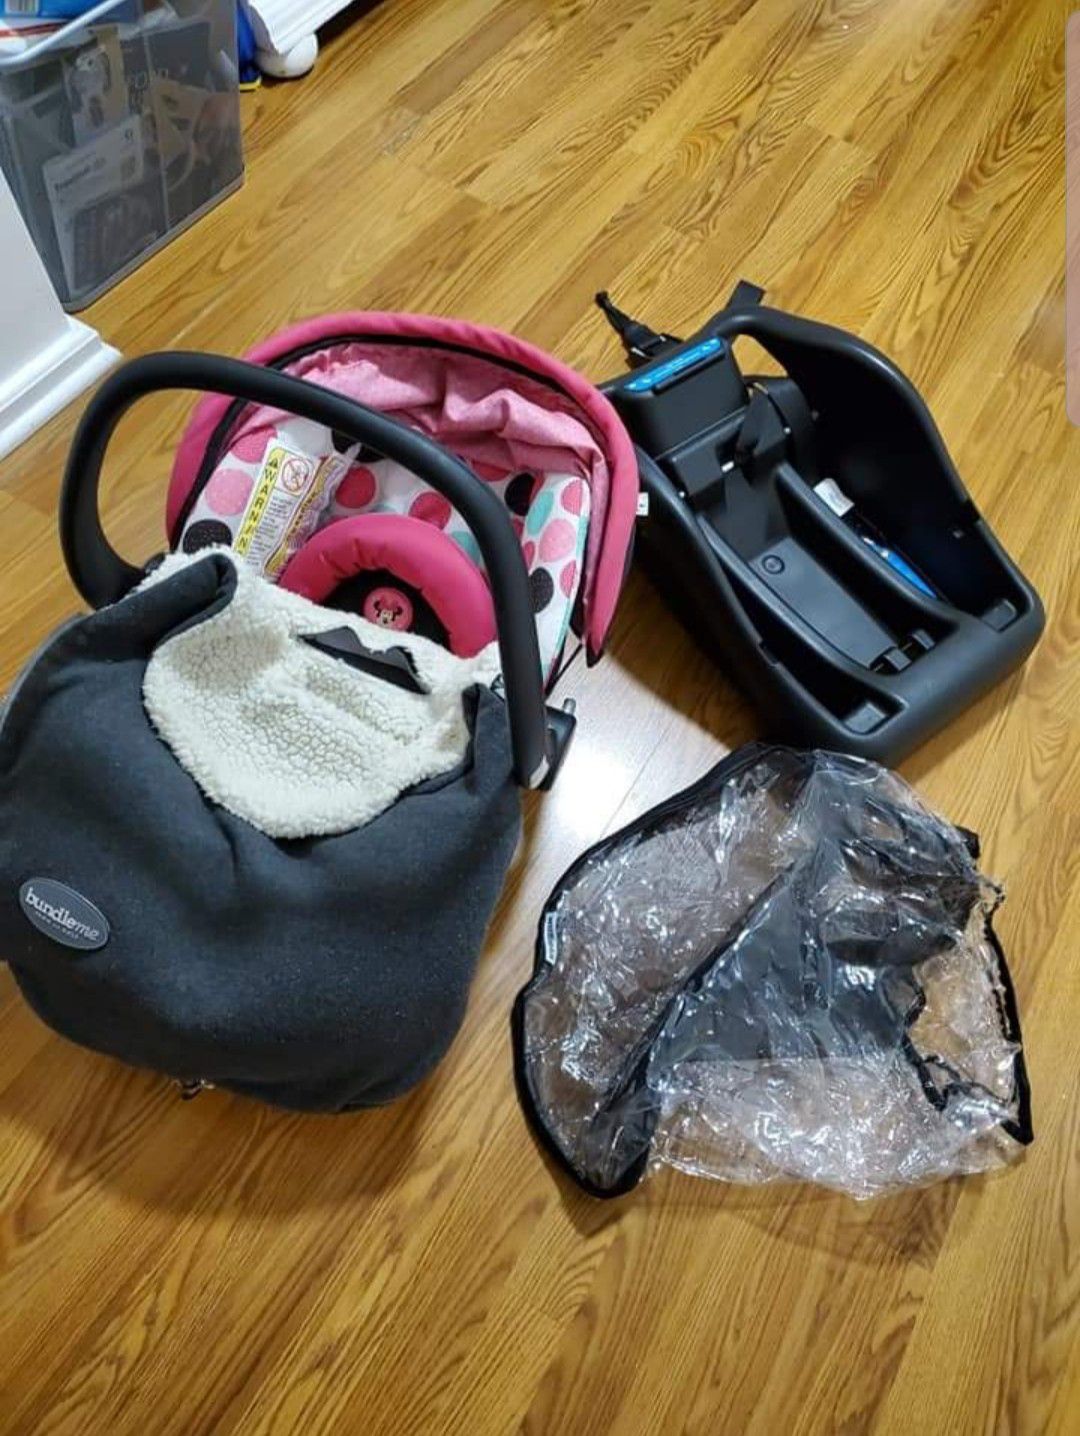 Car seat and accesories